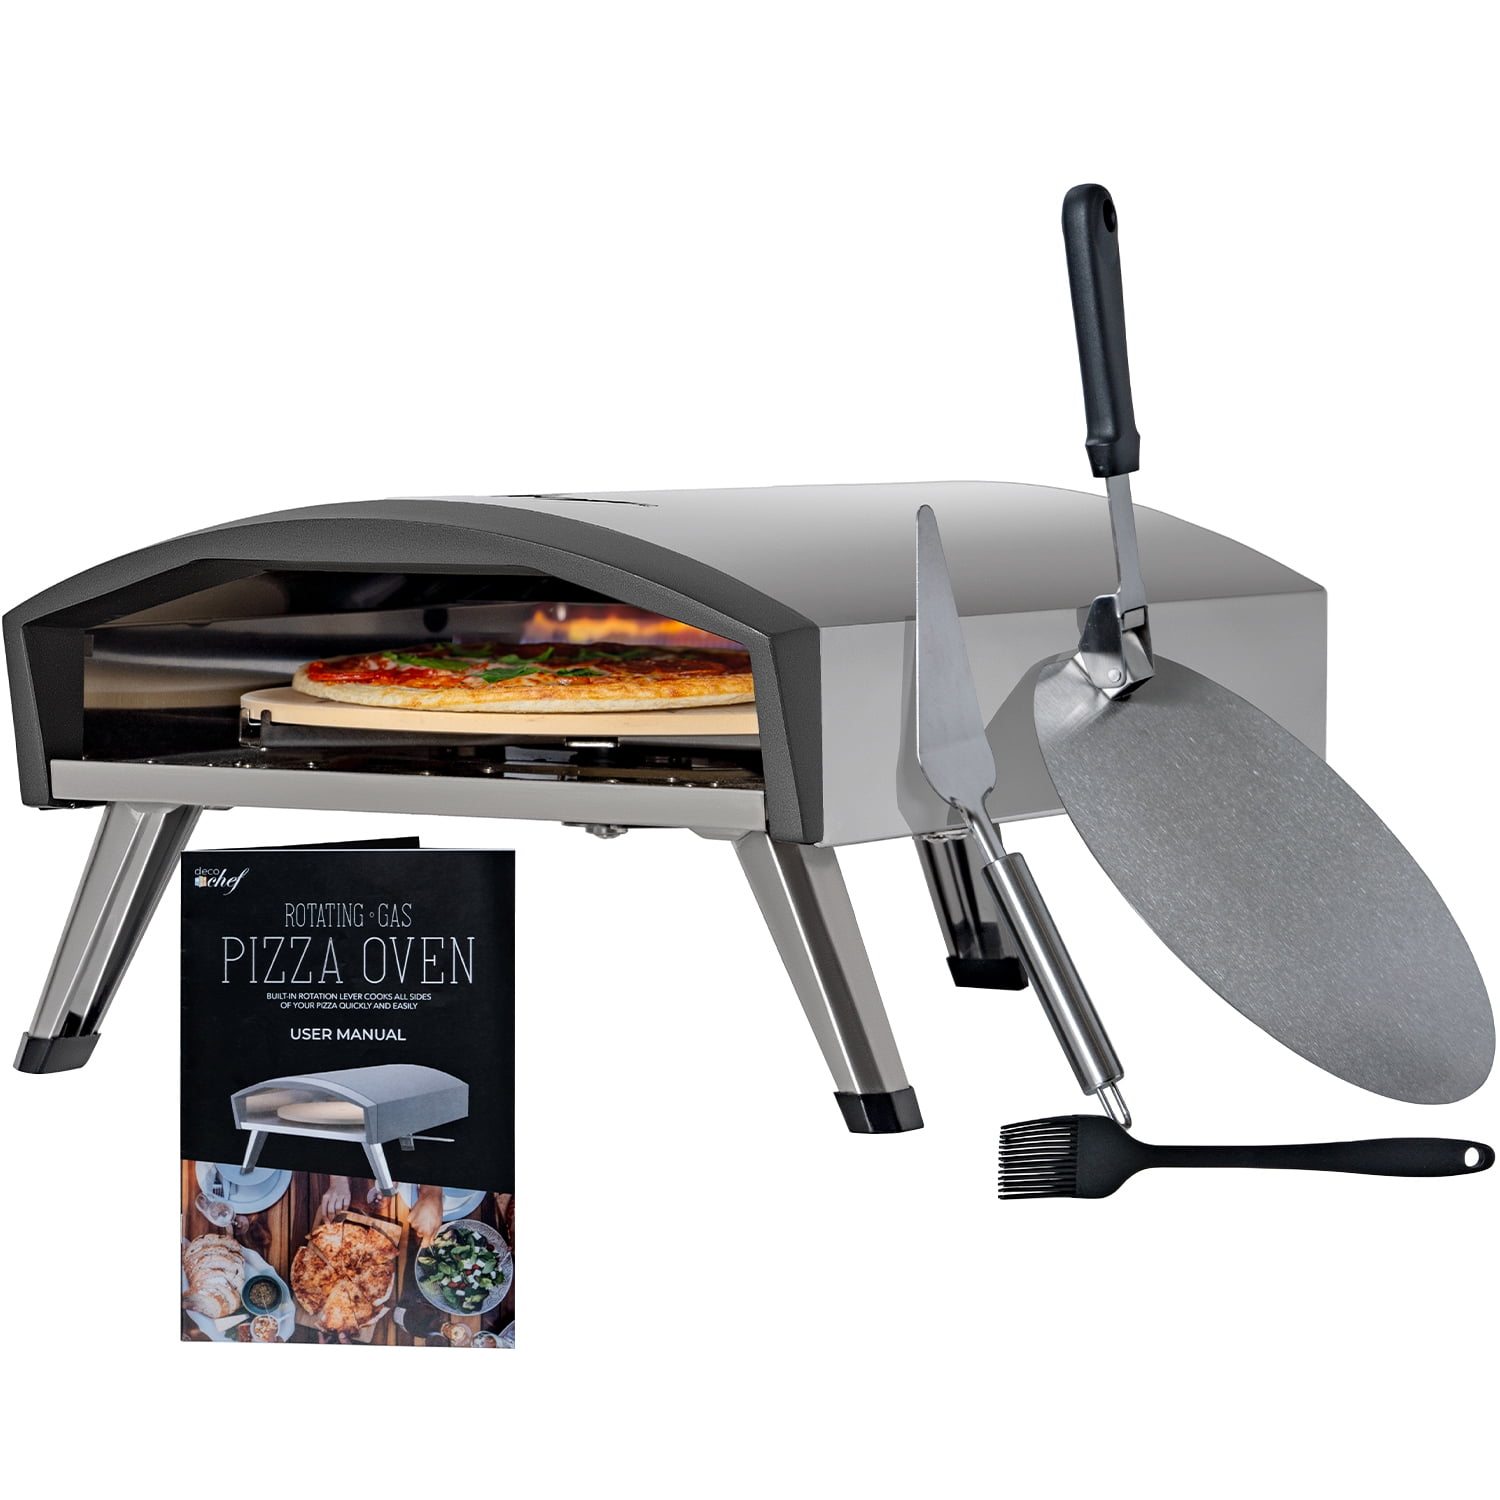 CAN YOUR PIZZA OVEN DO THIS?